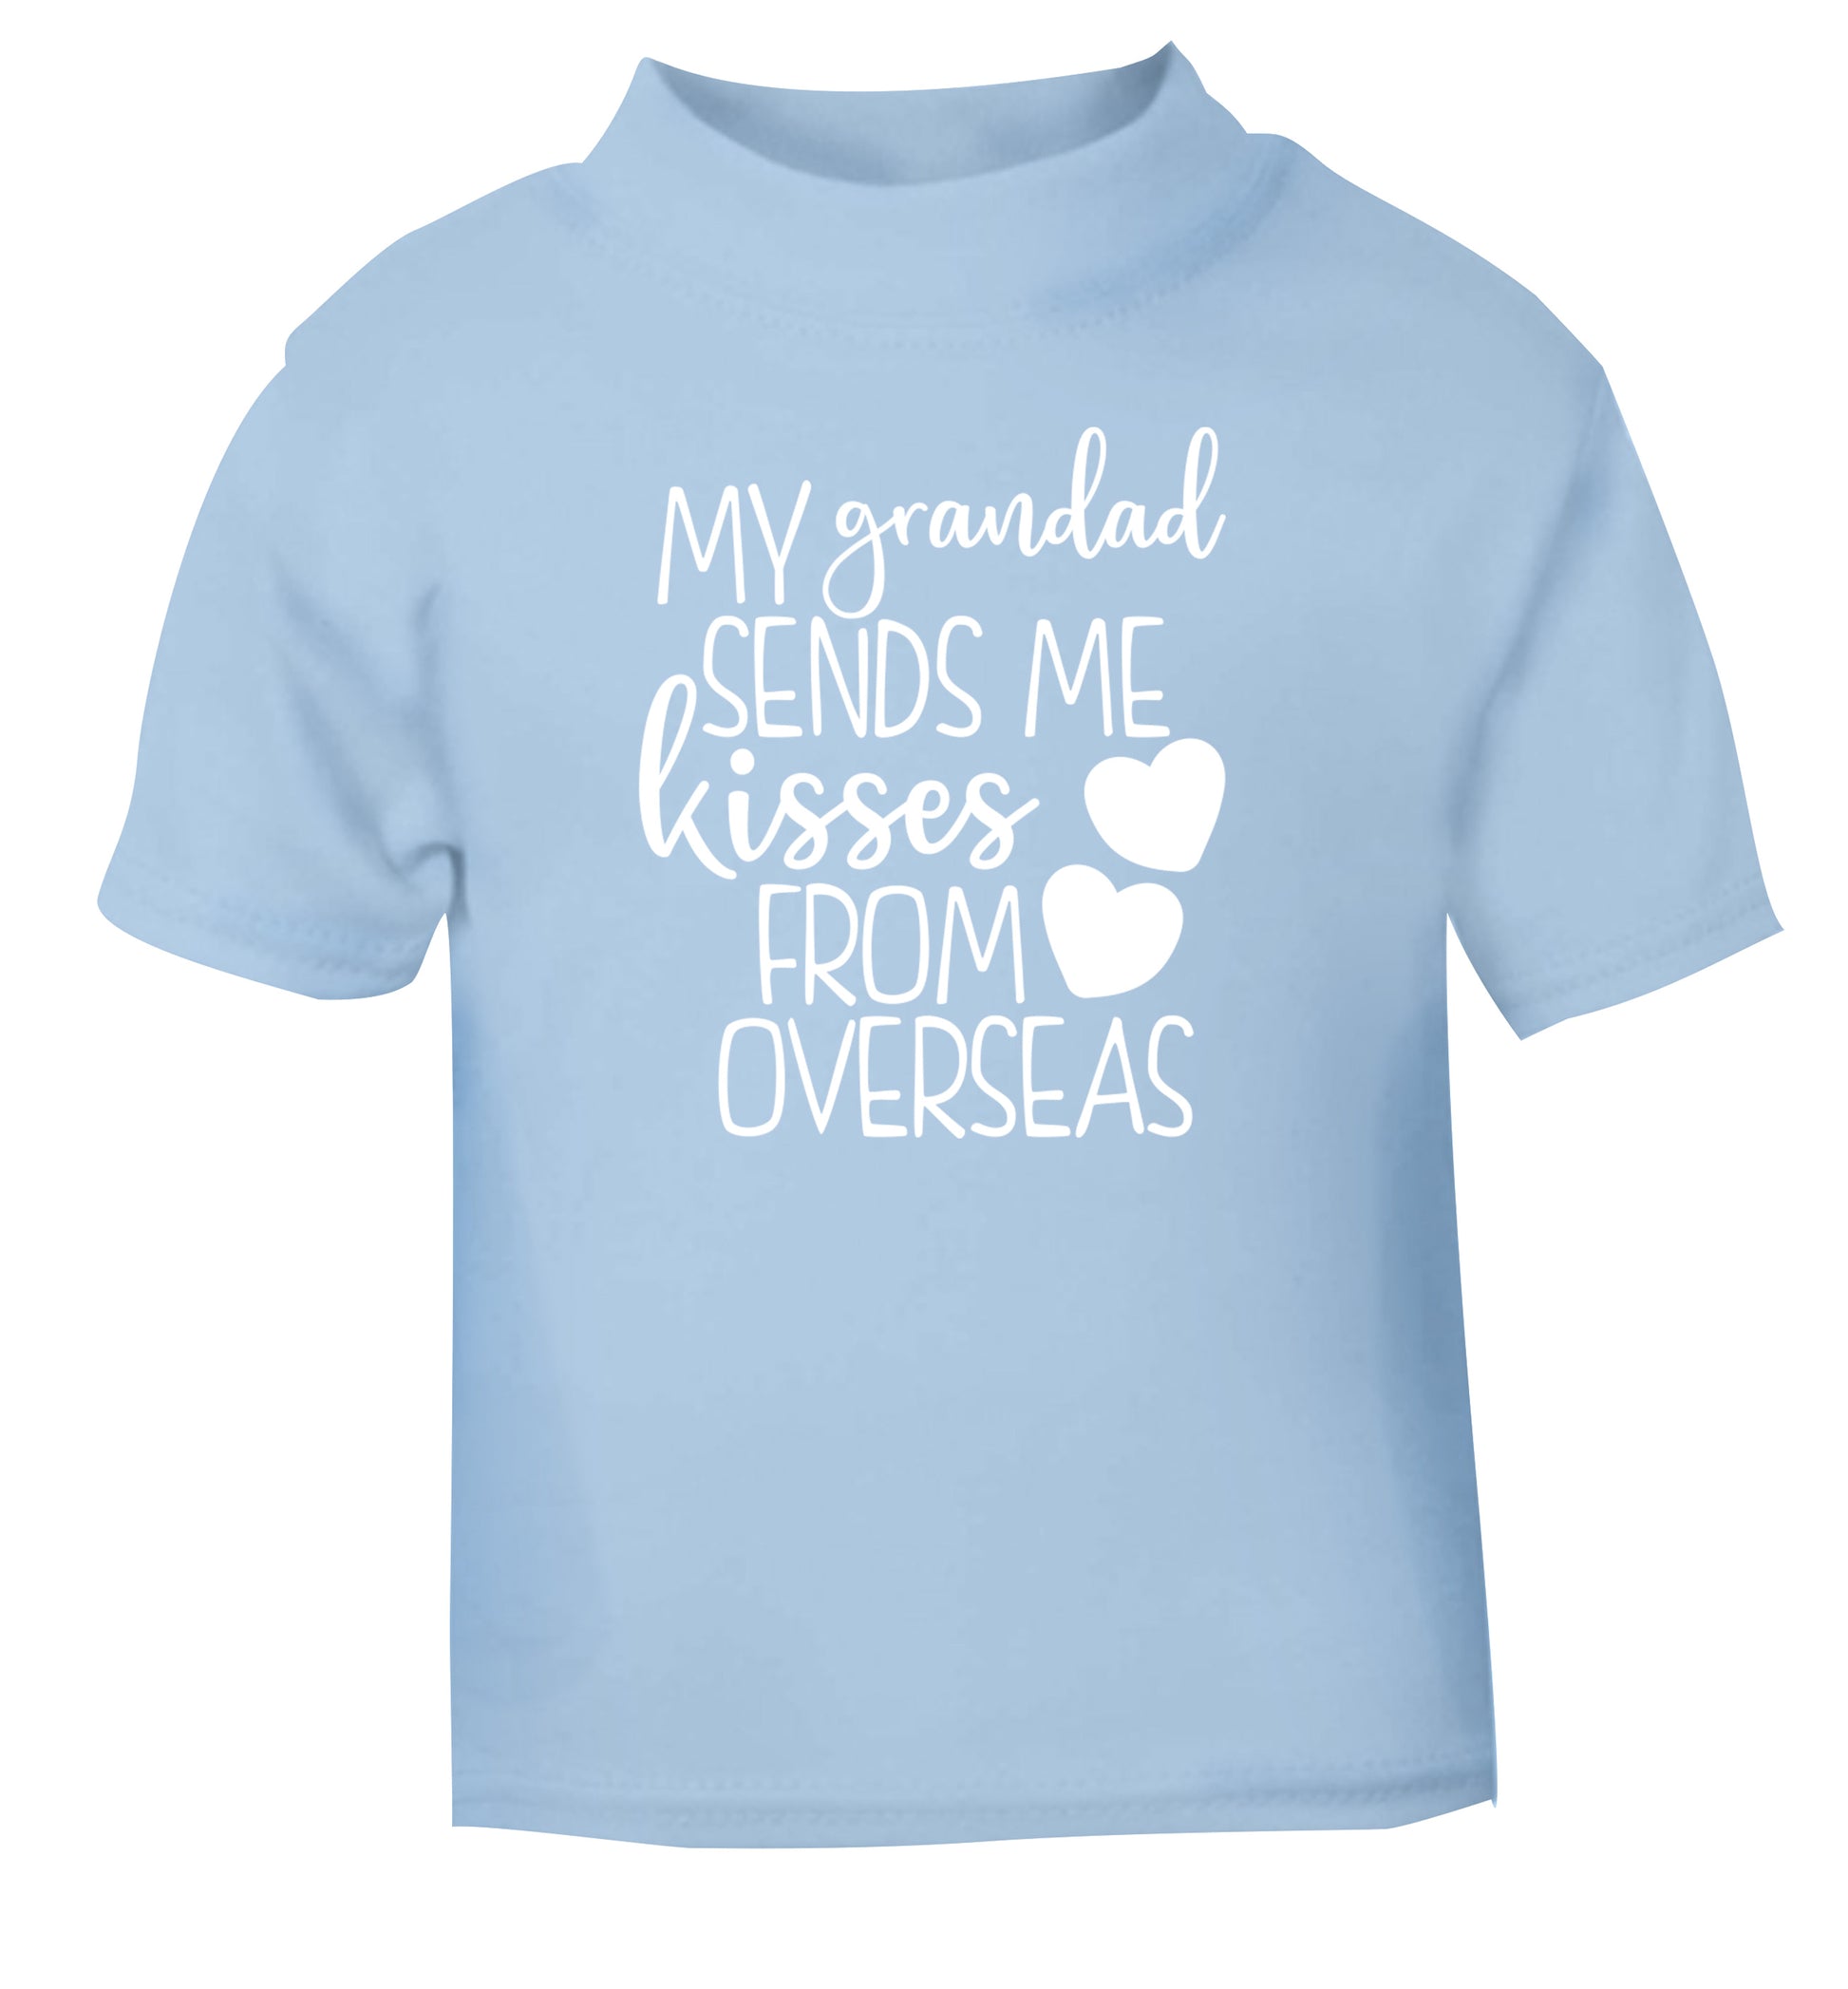 My Grandad sends me kisses from overseas light blue Baby Toddler Tshirt 2 Years